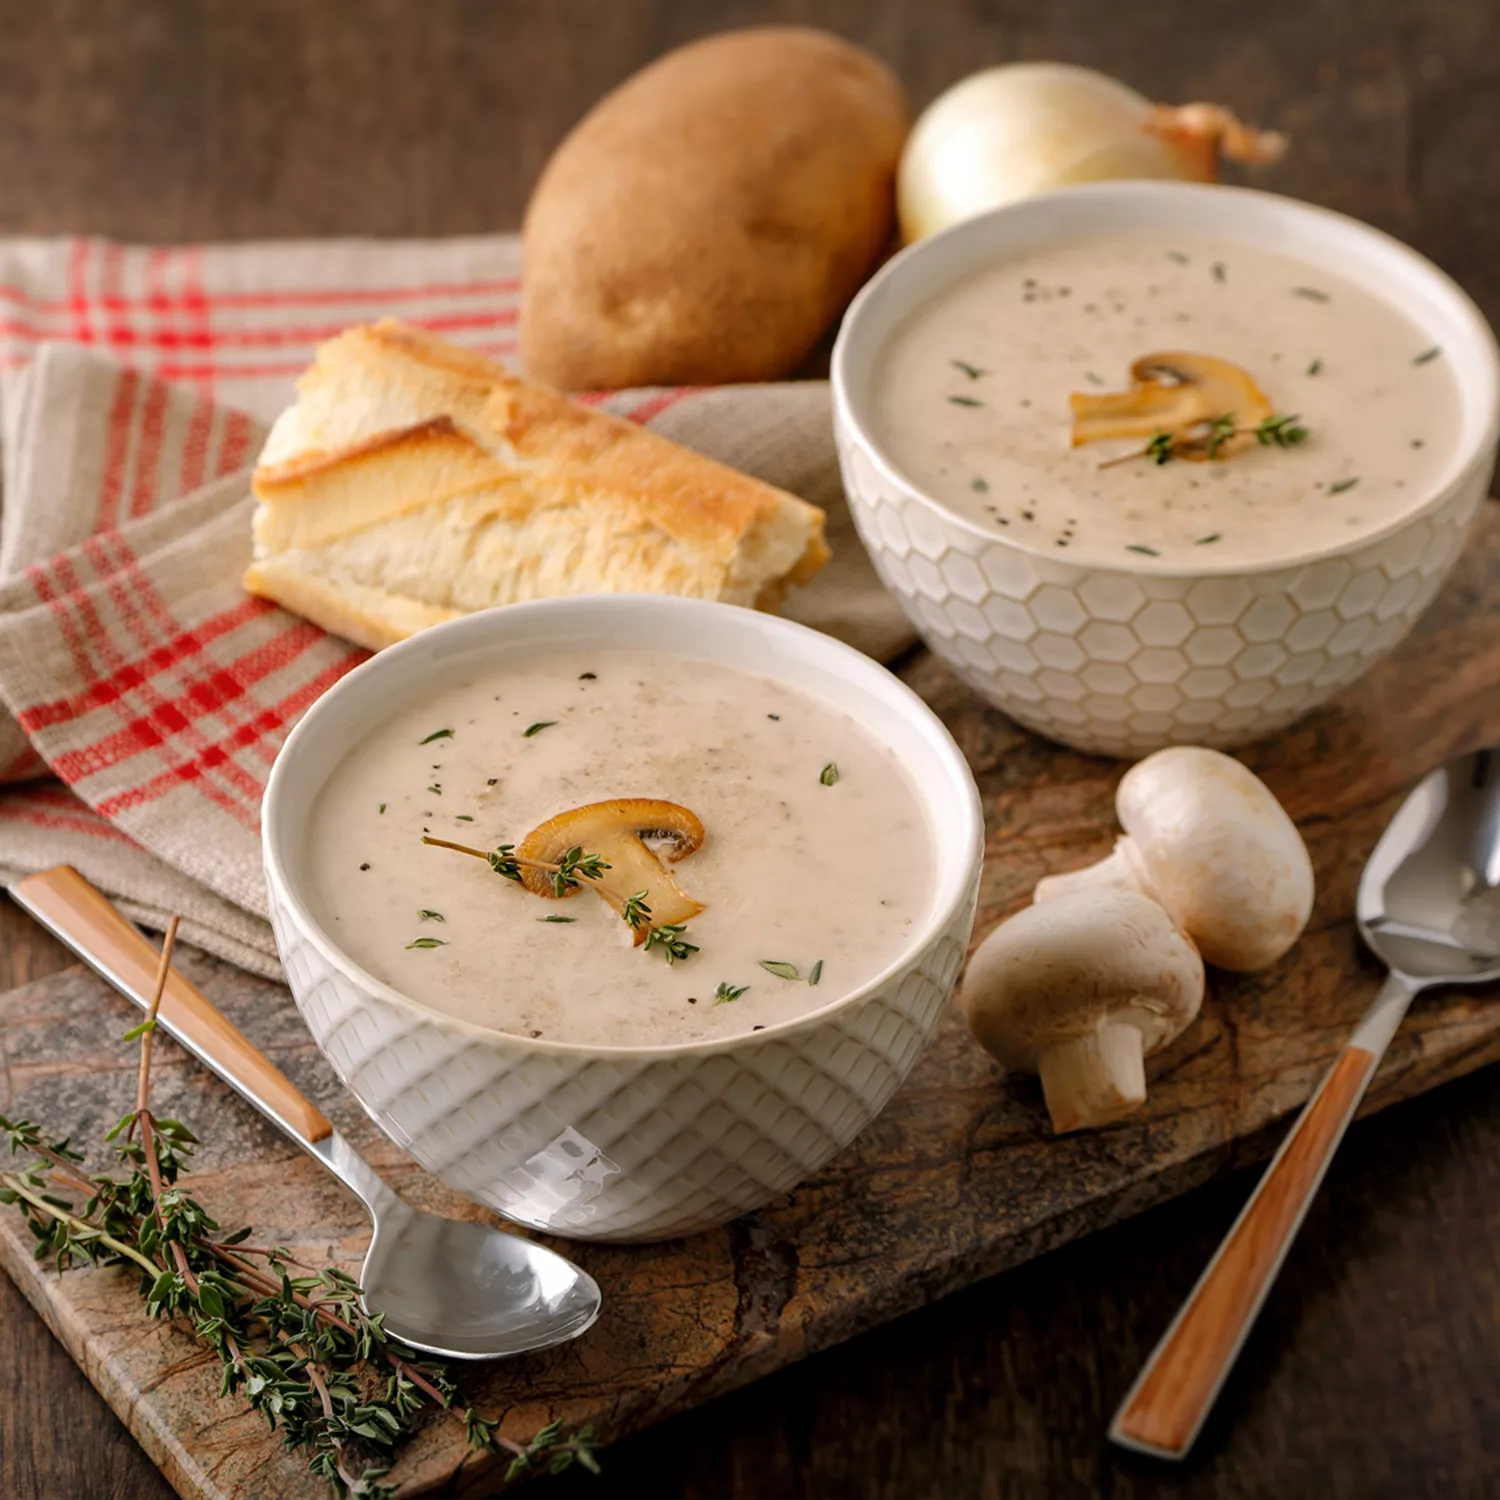 Philips Soup Maker – Enjoy Healthy & Perfectly Textured Soups